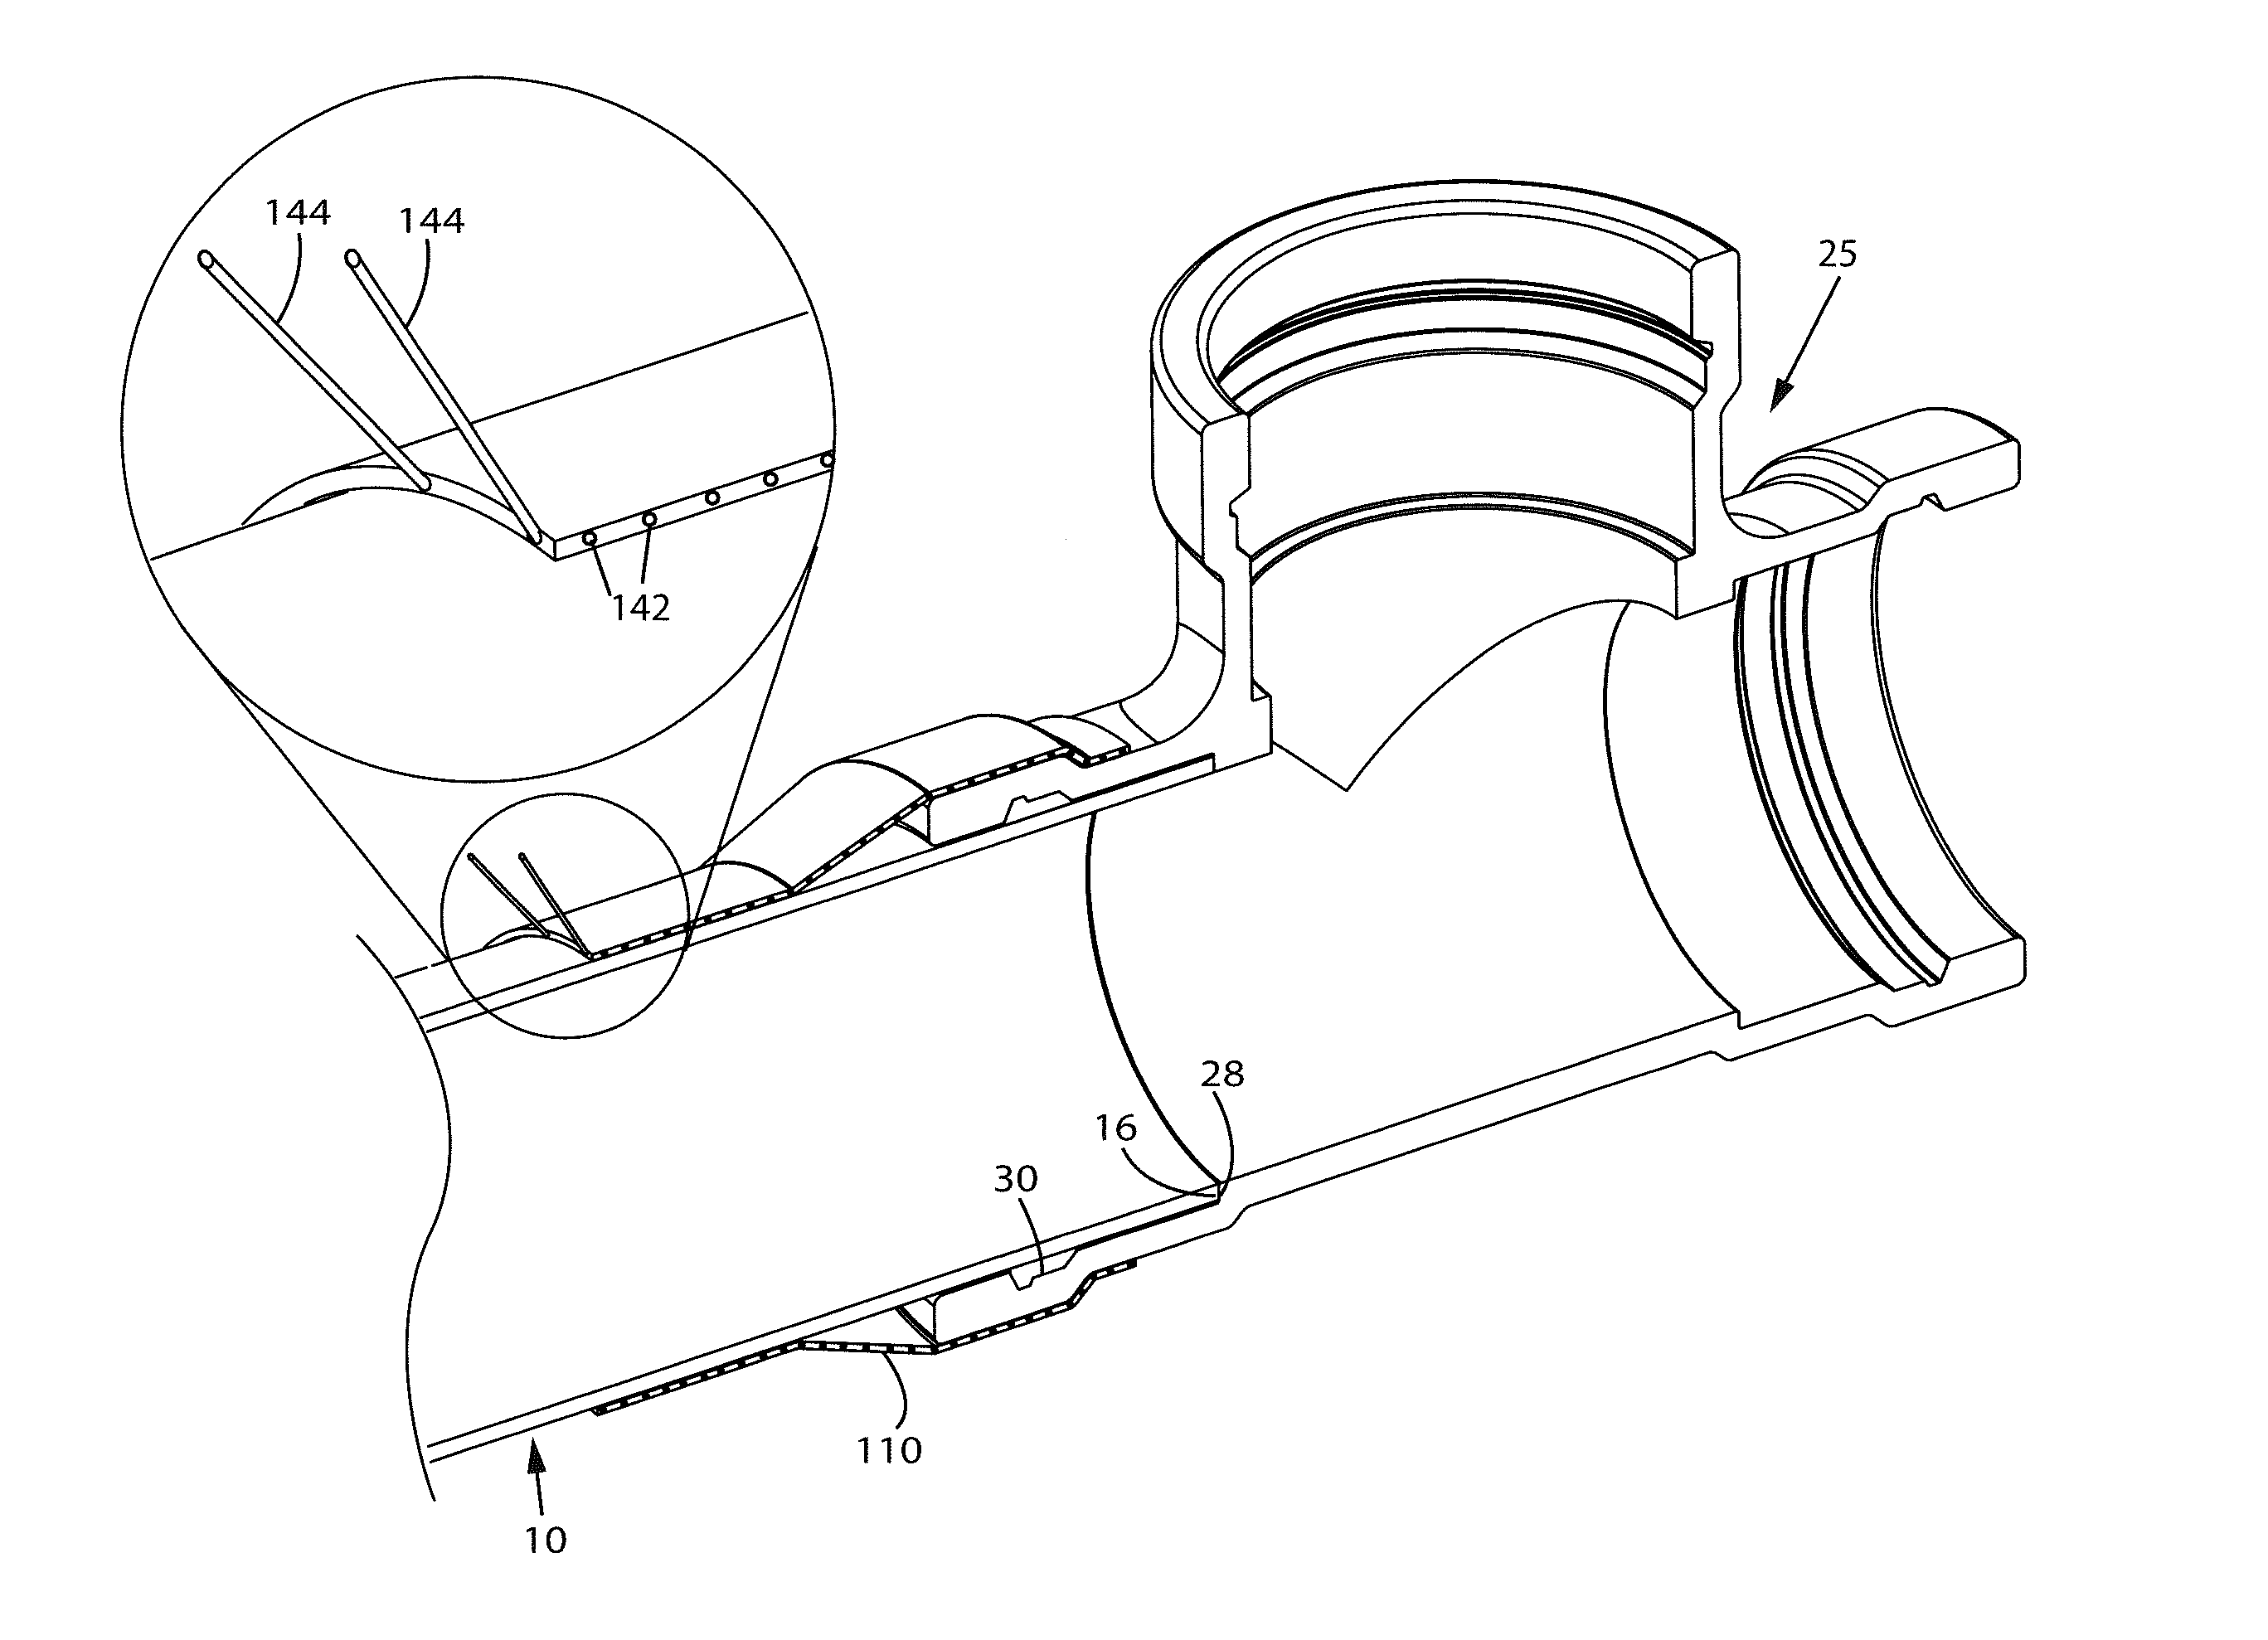 Method of joining pipes and fittings